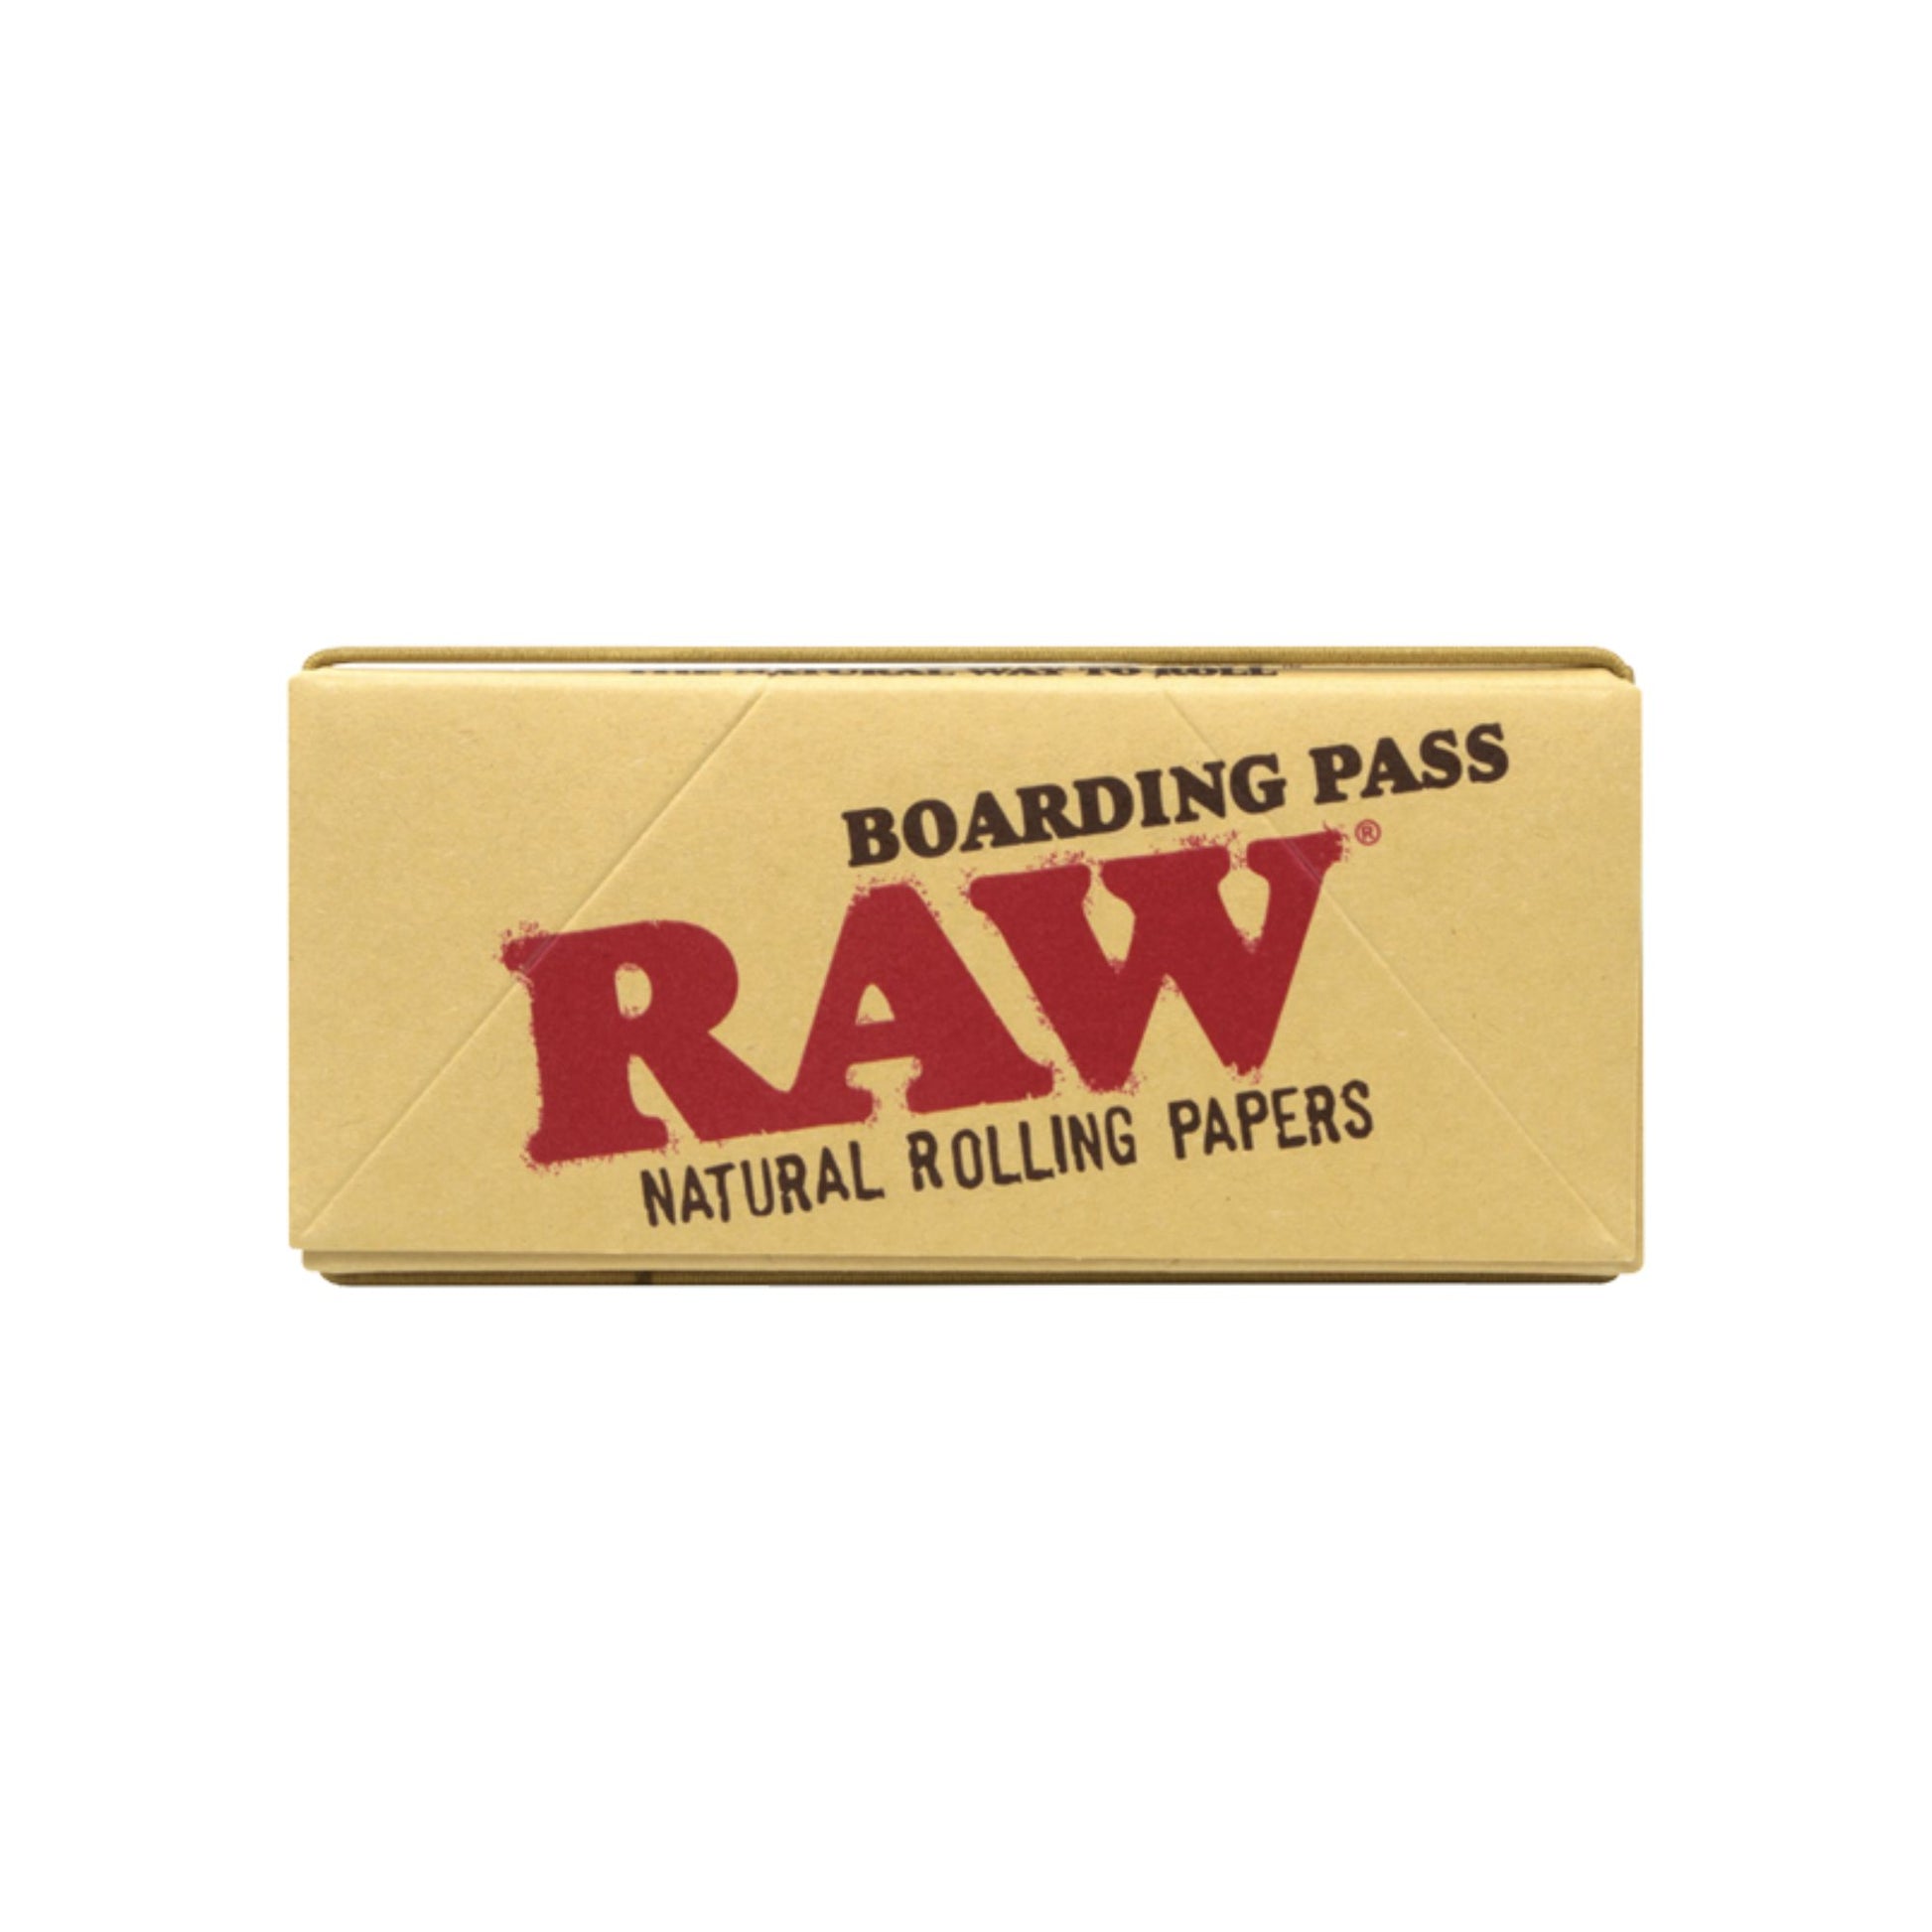 RAW Boarding Pass Shredder and Rolling Tray